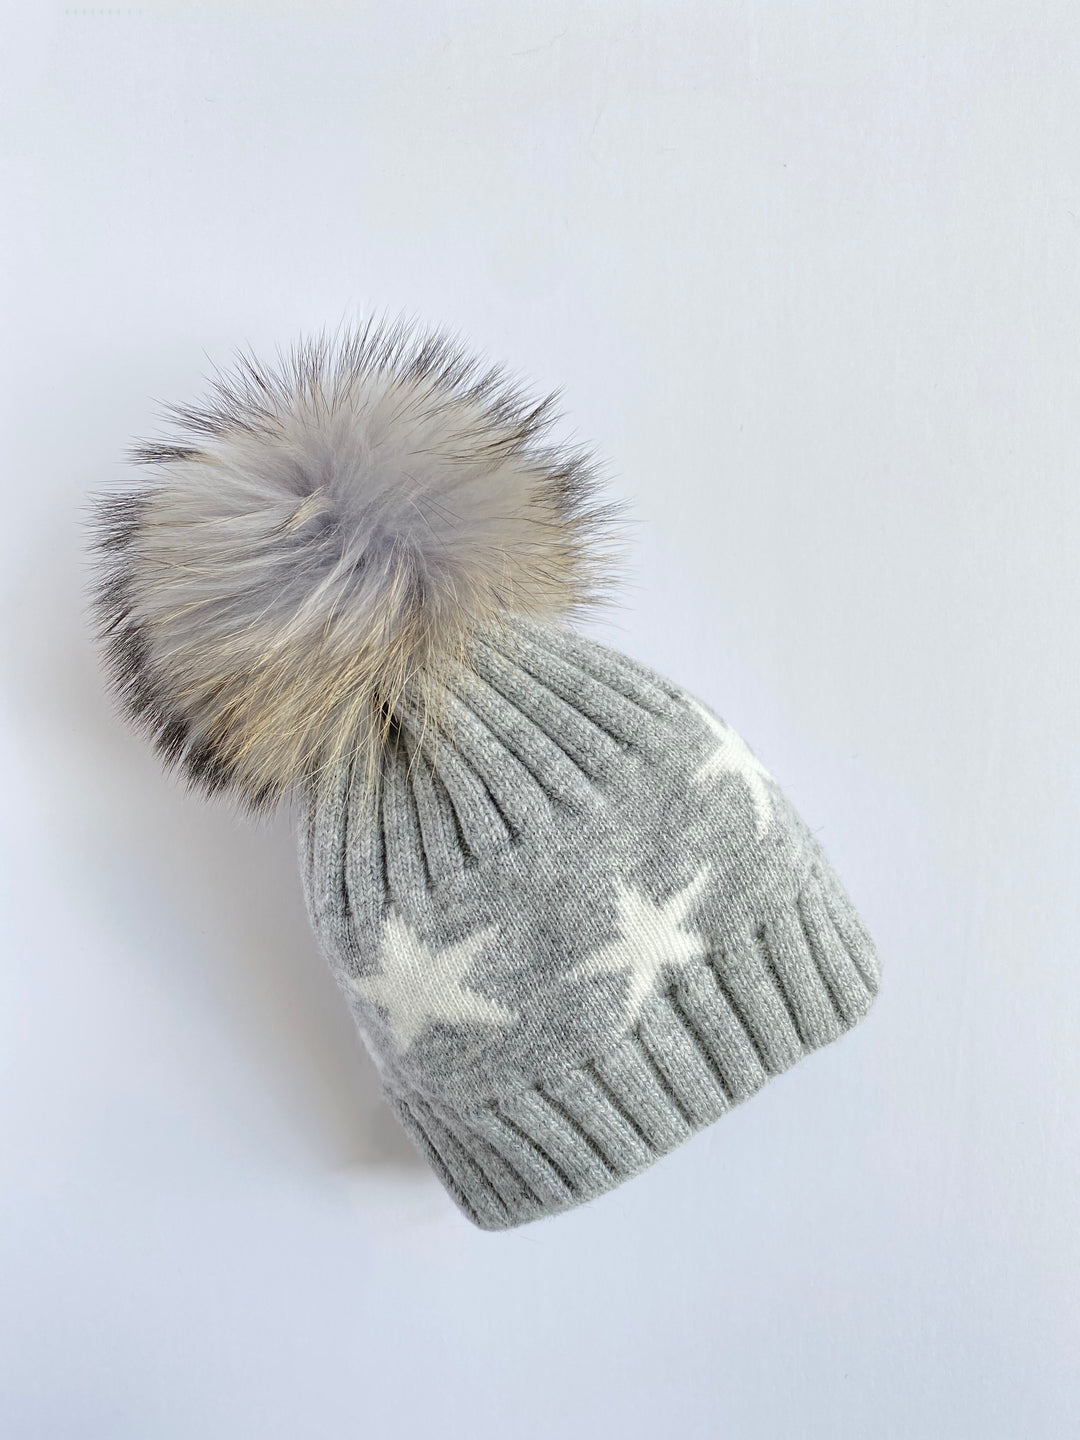 Equation Starry Hat in Heather Gray with white stars